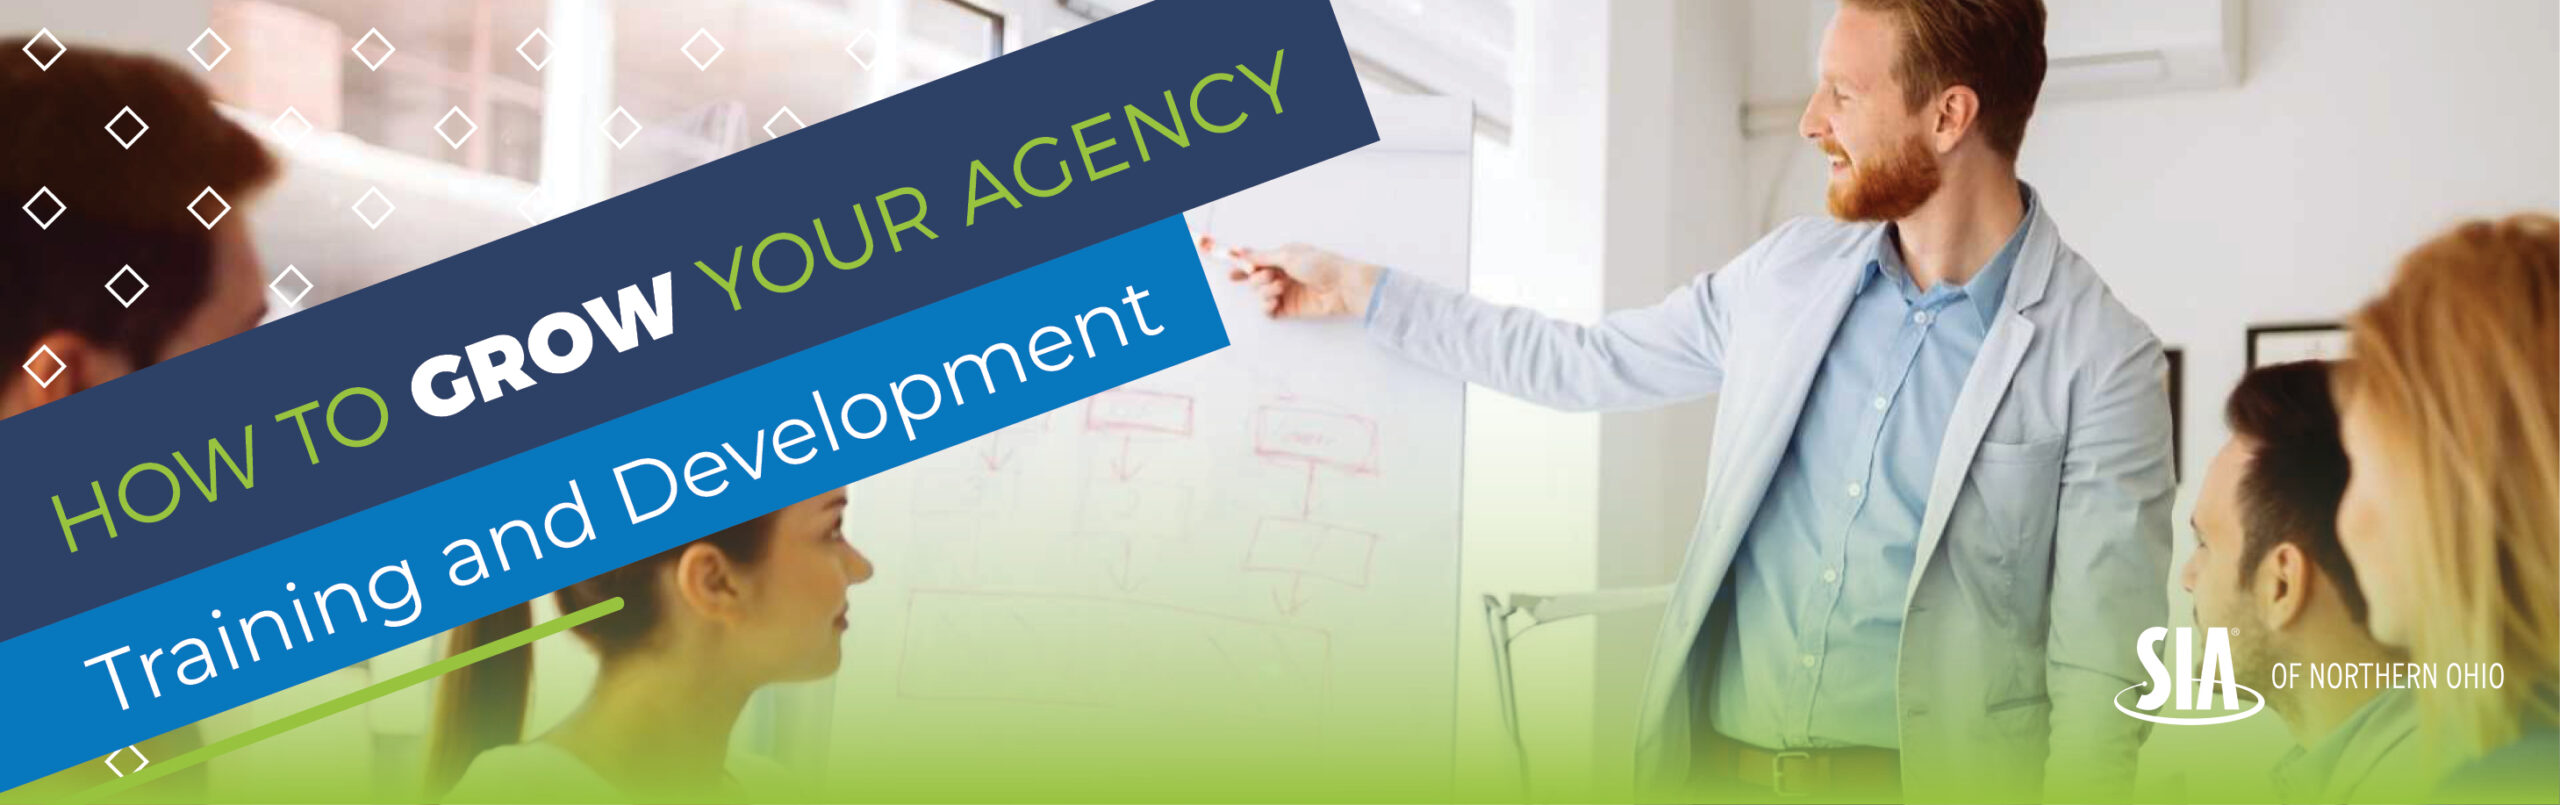 How to Grow Your Agency – Training and Development SIA of Northern Ohio